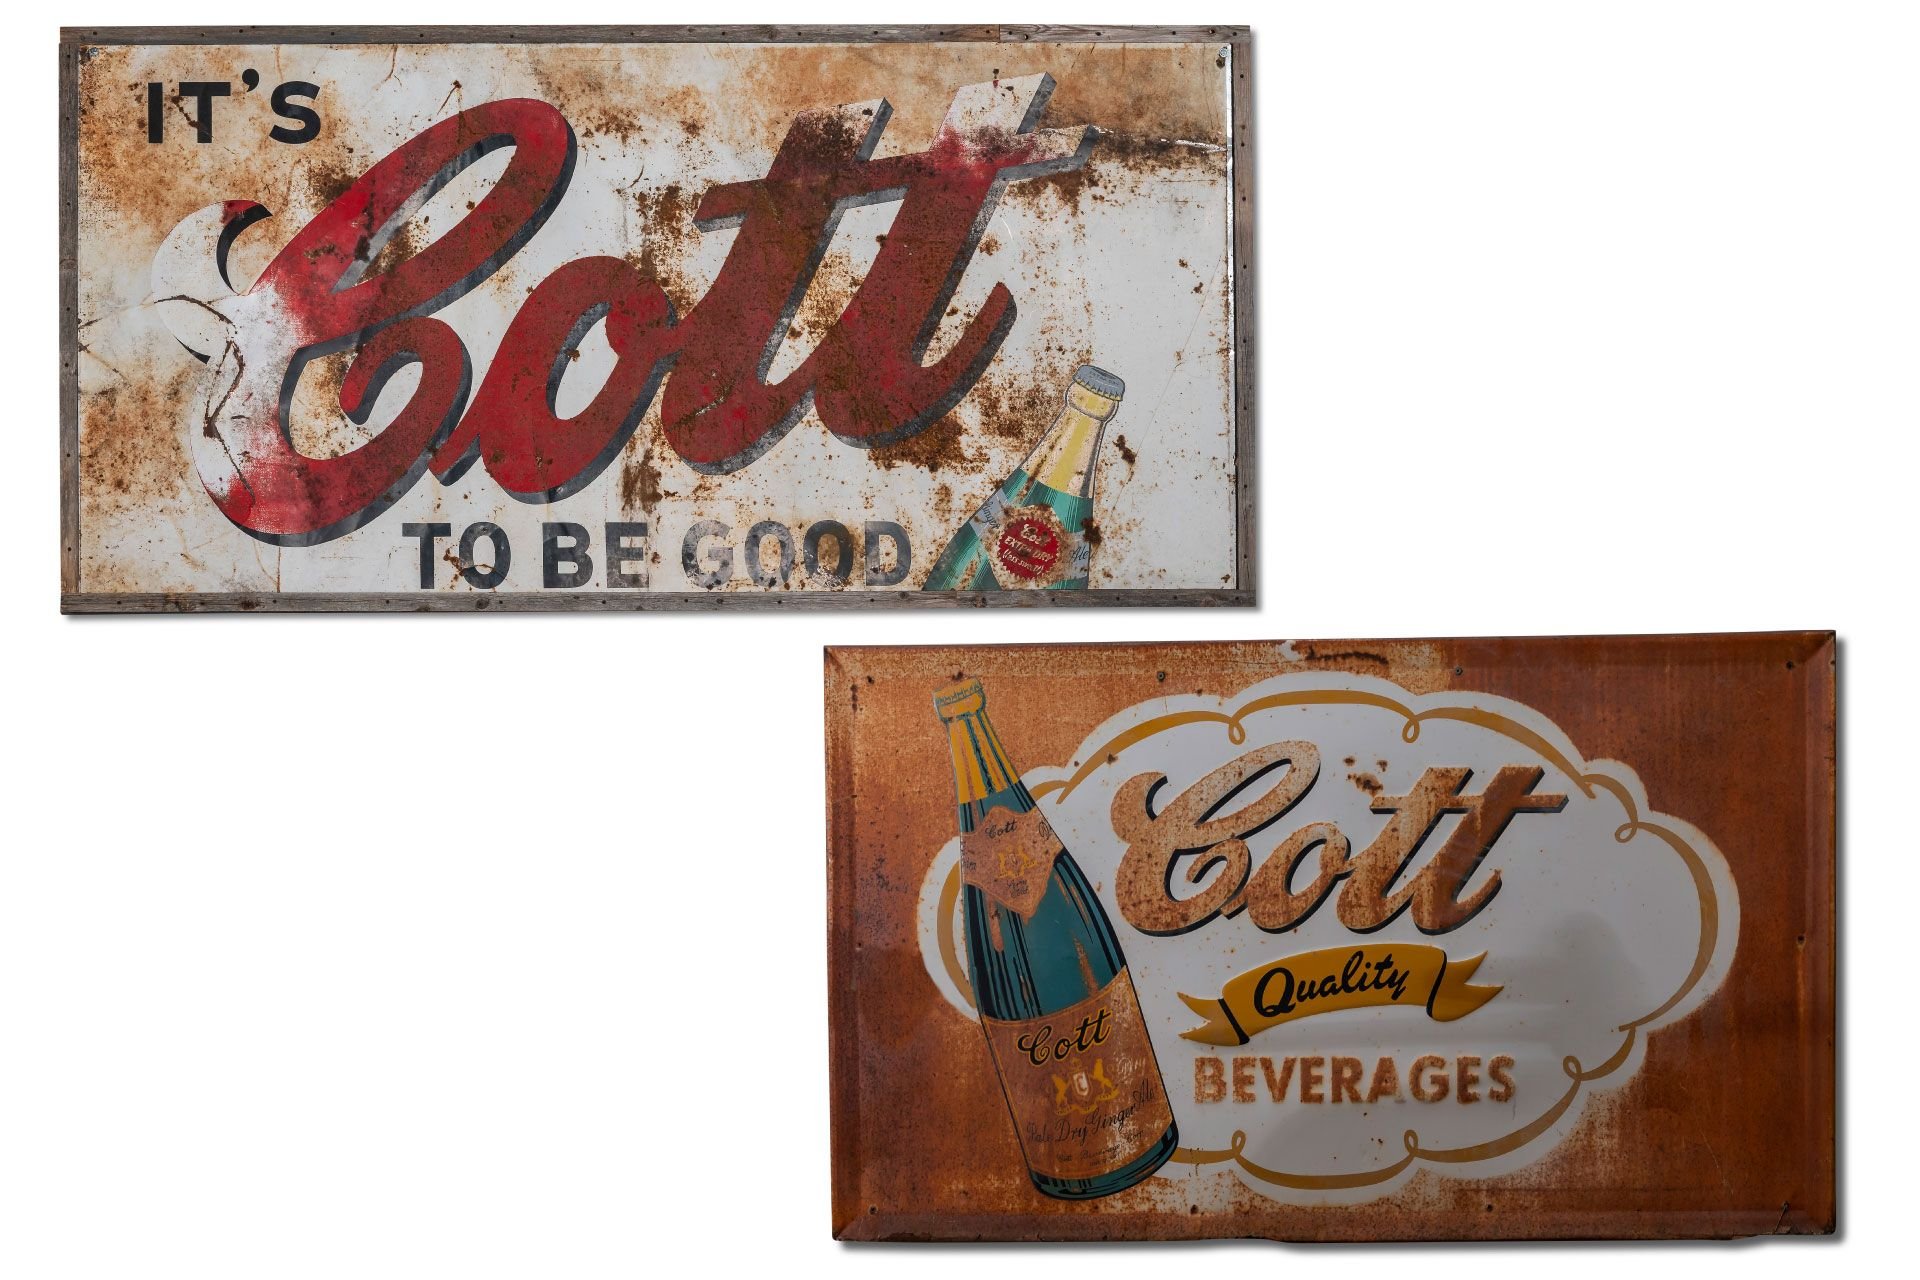 For Sale Large 'It's Cott to be Good' Metal Sign